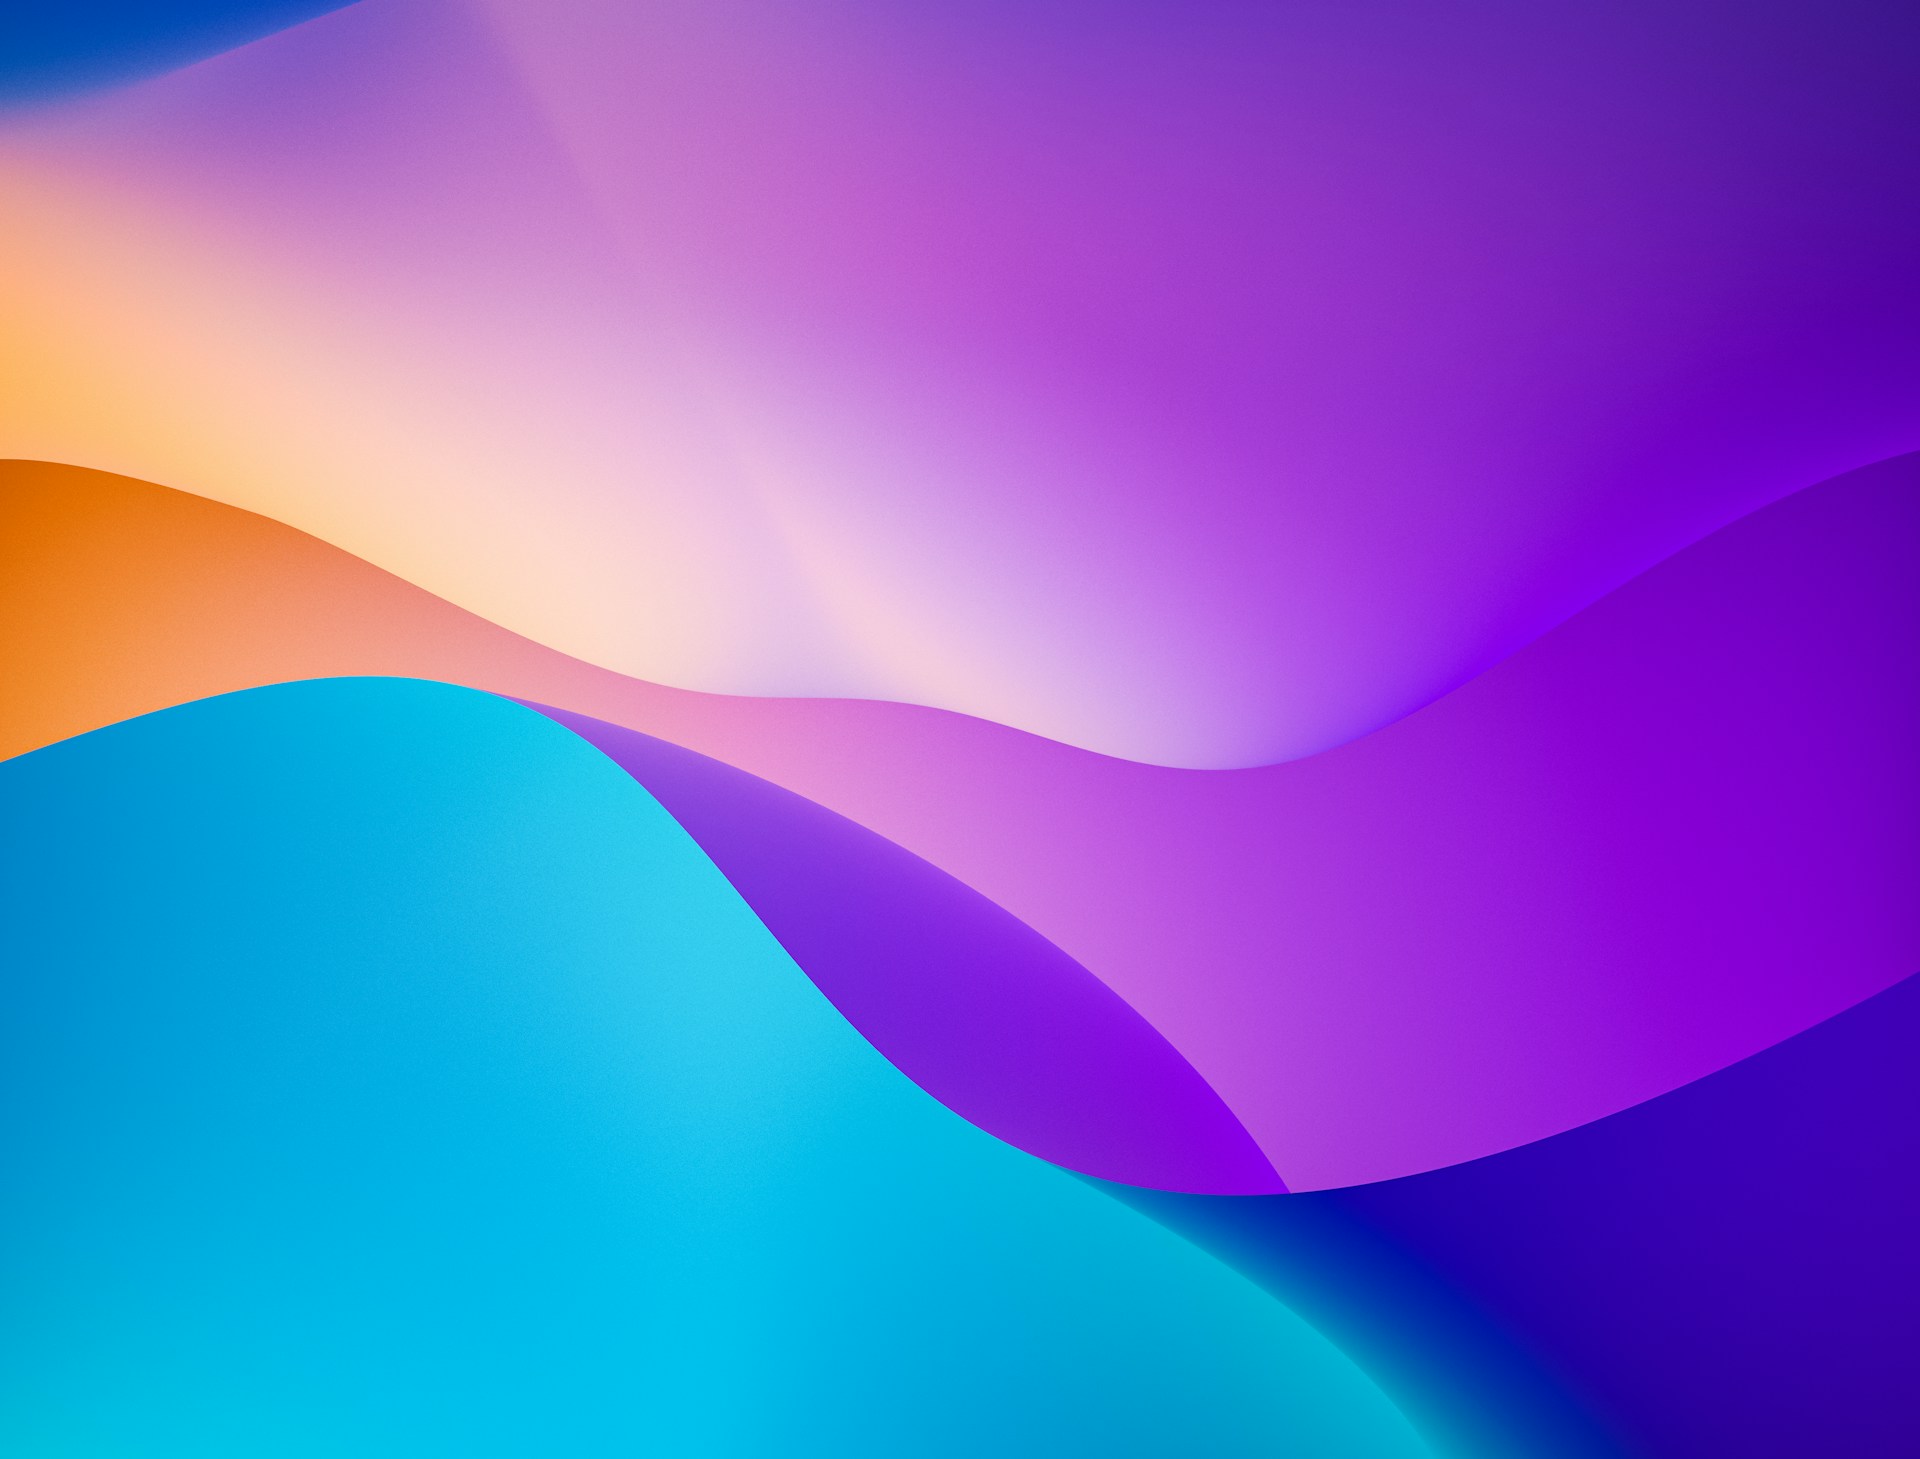 abstract image of purple, blue and orange swirly background